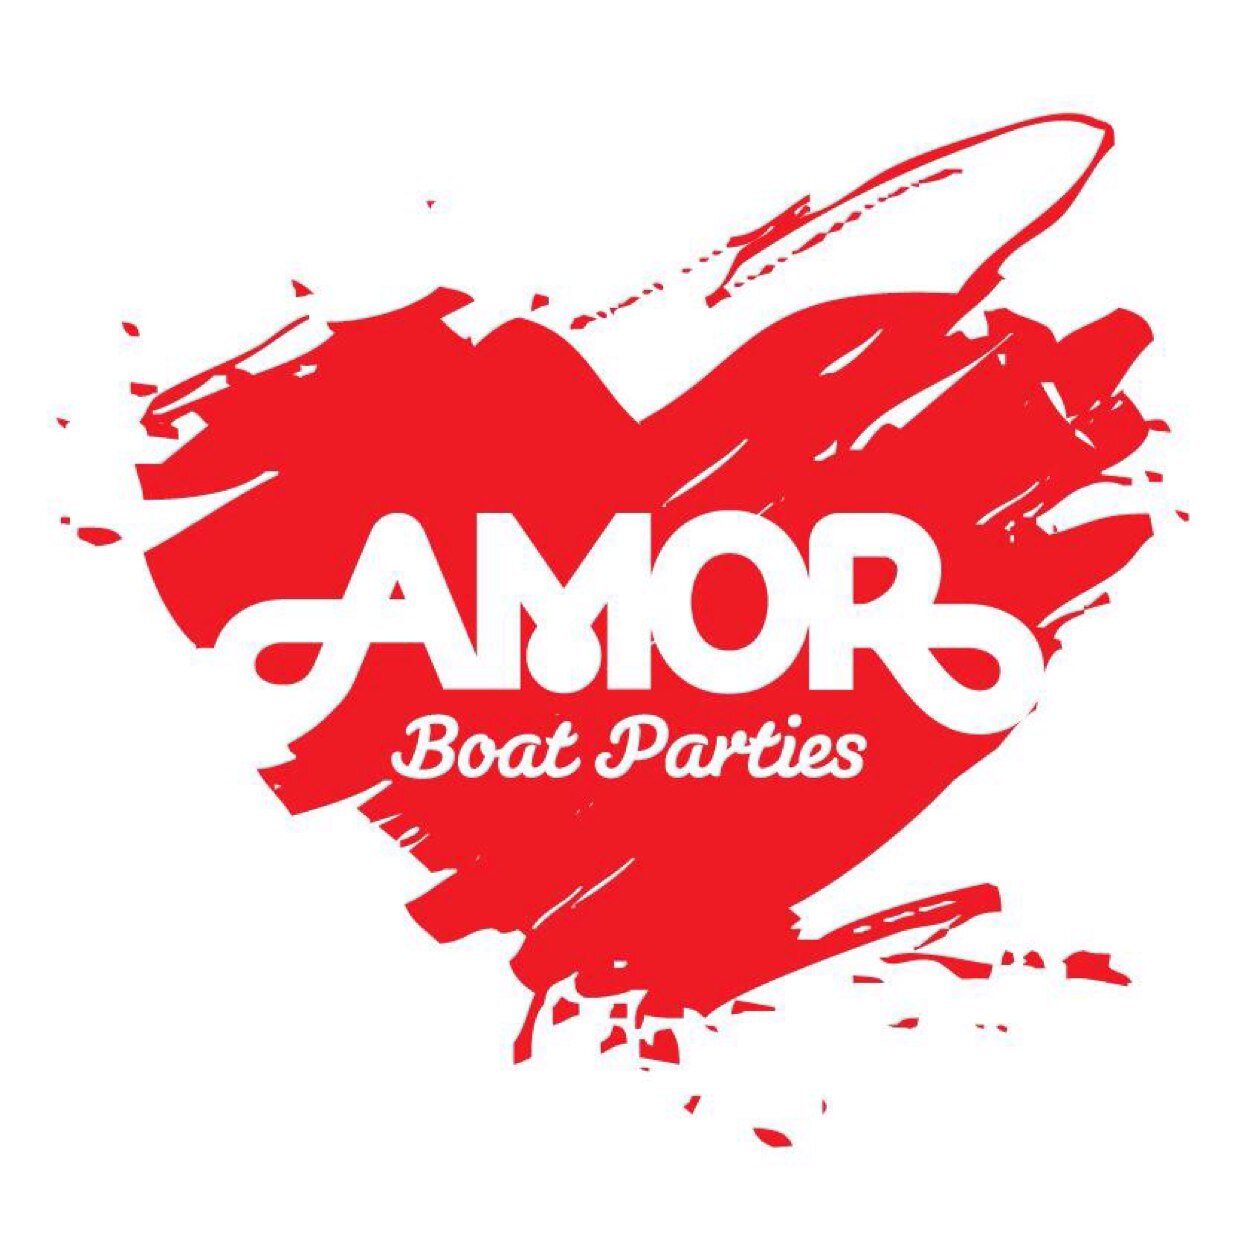 Amor Boat Parties. Brought to you by https://t.co/1FqbIHC1Ly https://t.co/LJj7a9km1h Alistjohn@gmail.com #AListLondon